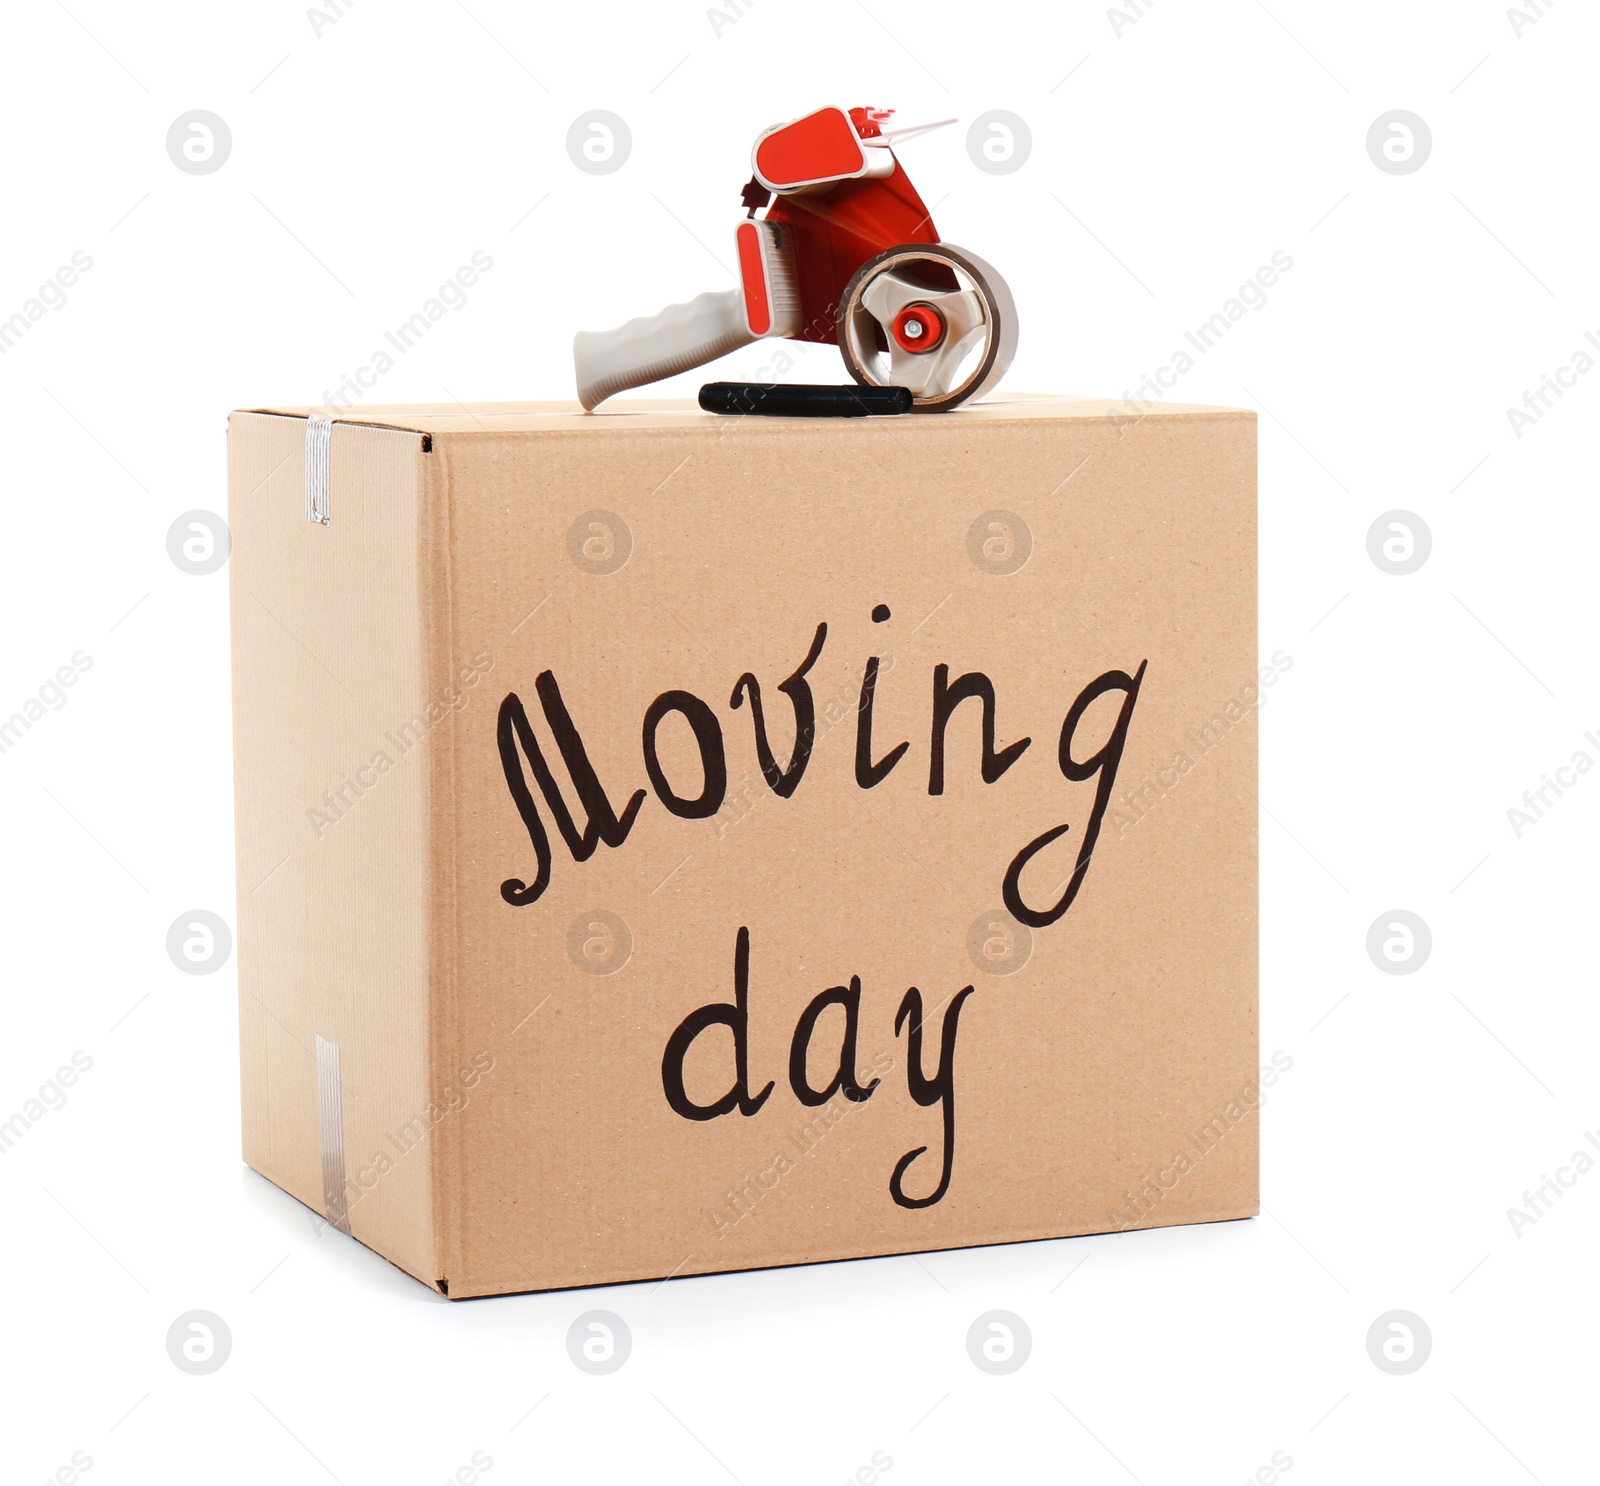 Photo of Moving box, marker and adhesive tape dispenser on white background